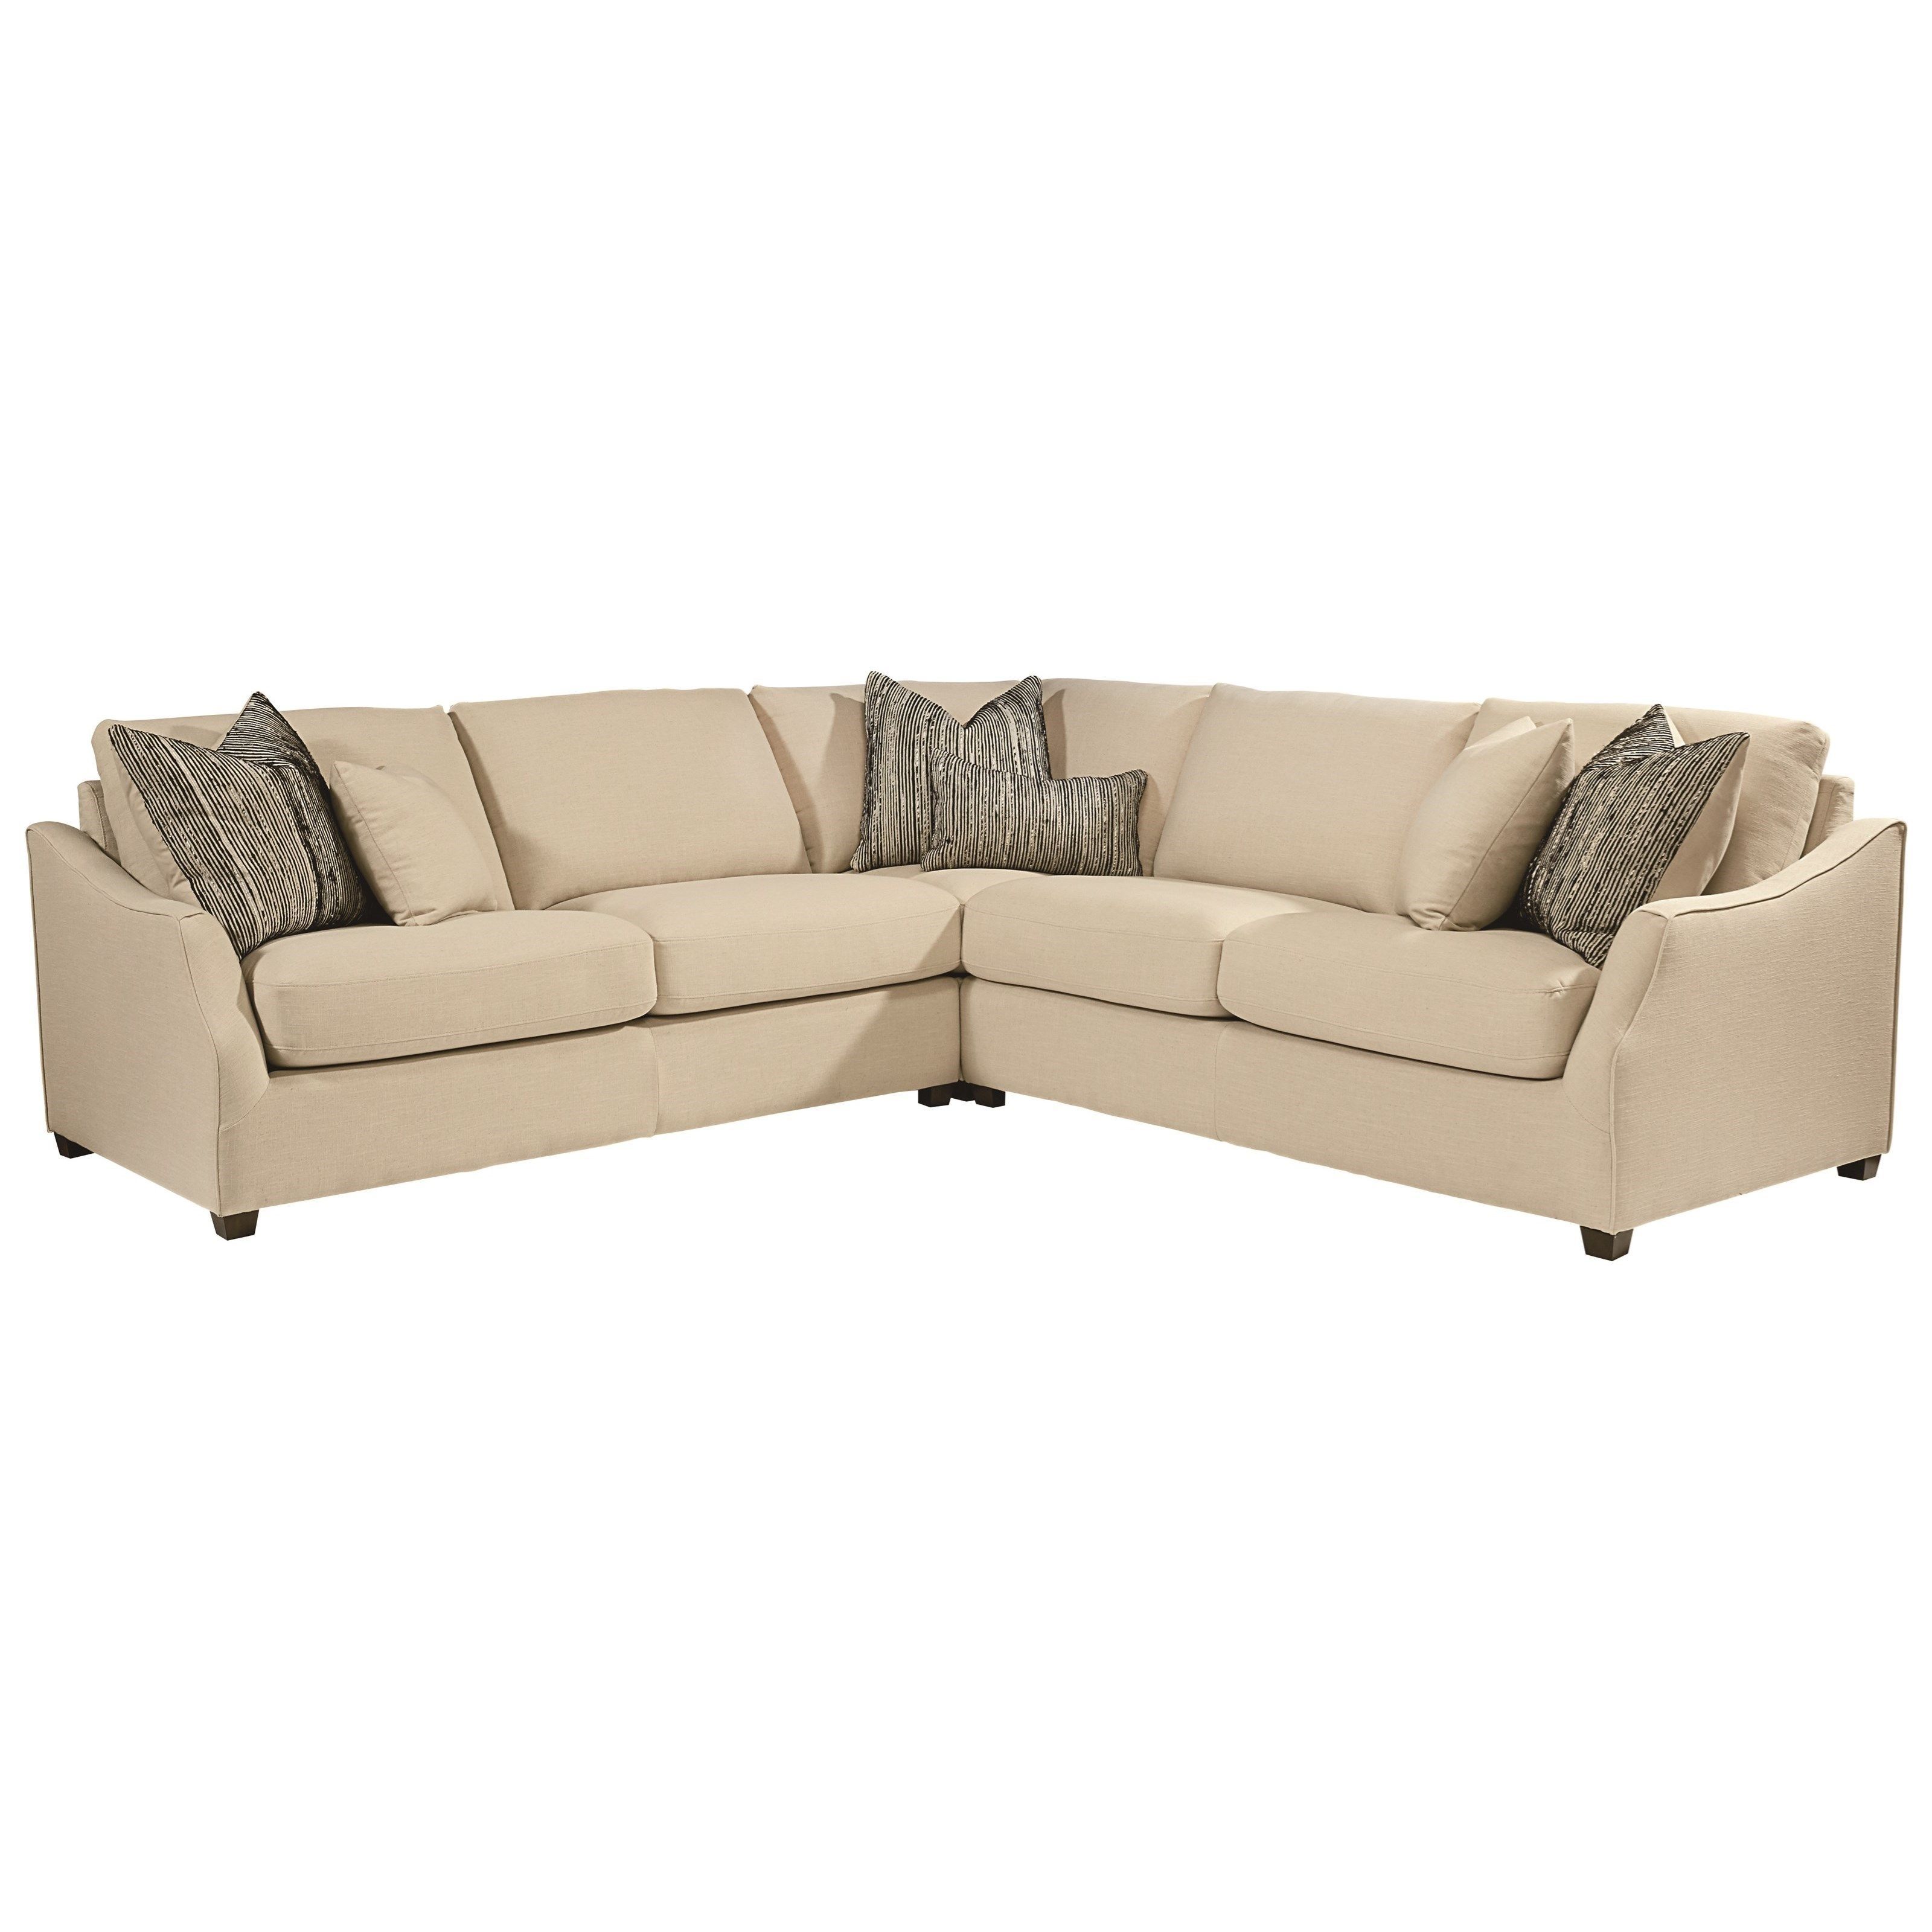 Magnolia Homejoanna Gaines Homestead Three Piece Sectional With Regard To Minneapolis Sectional Sofas (Photo 8 of 10)